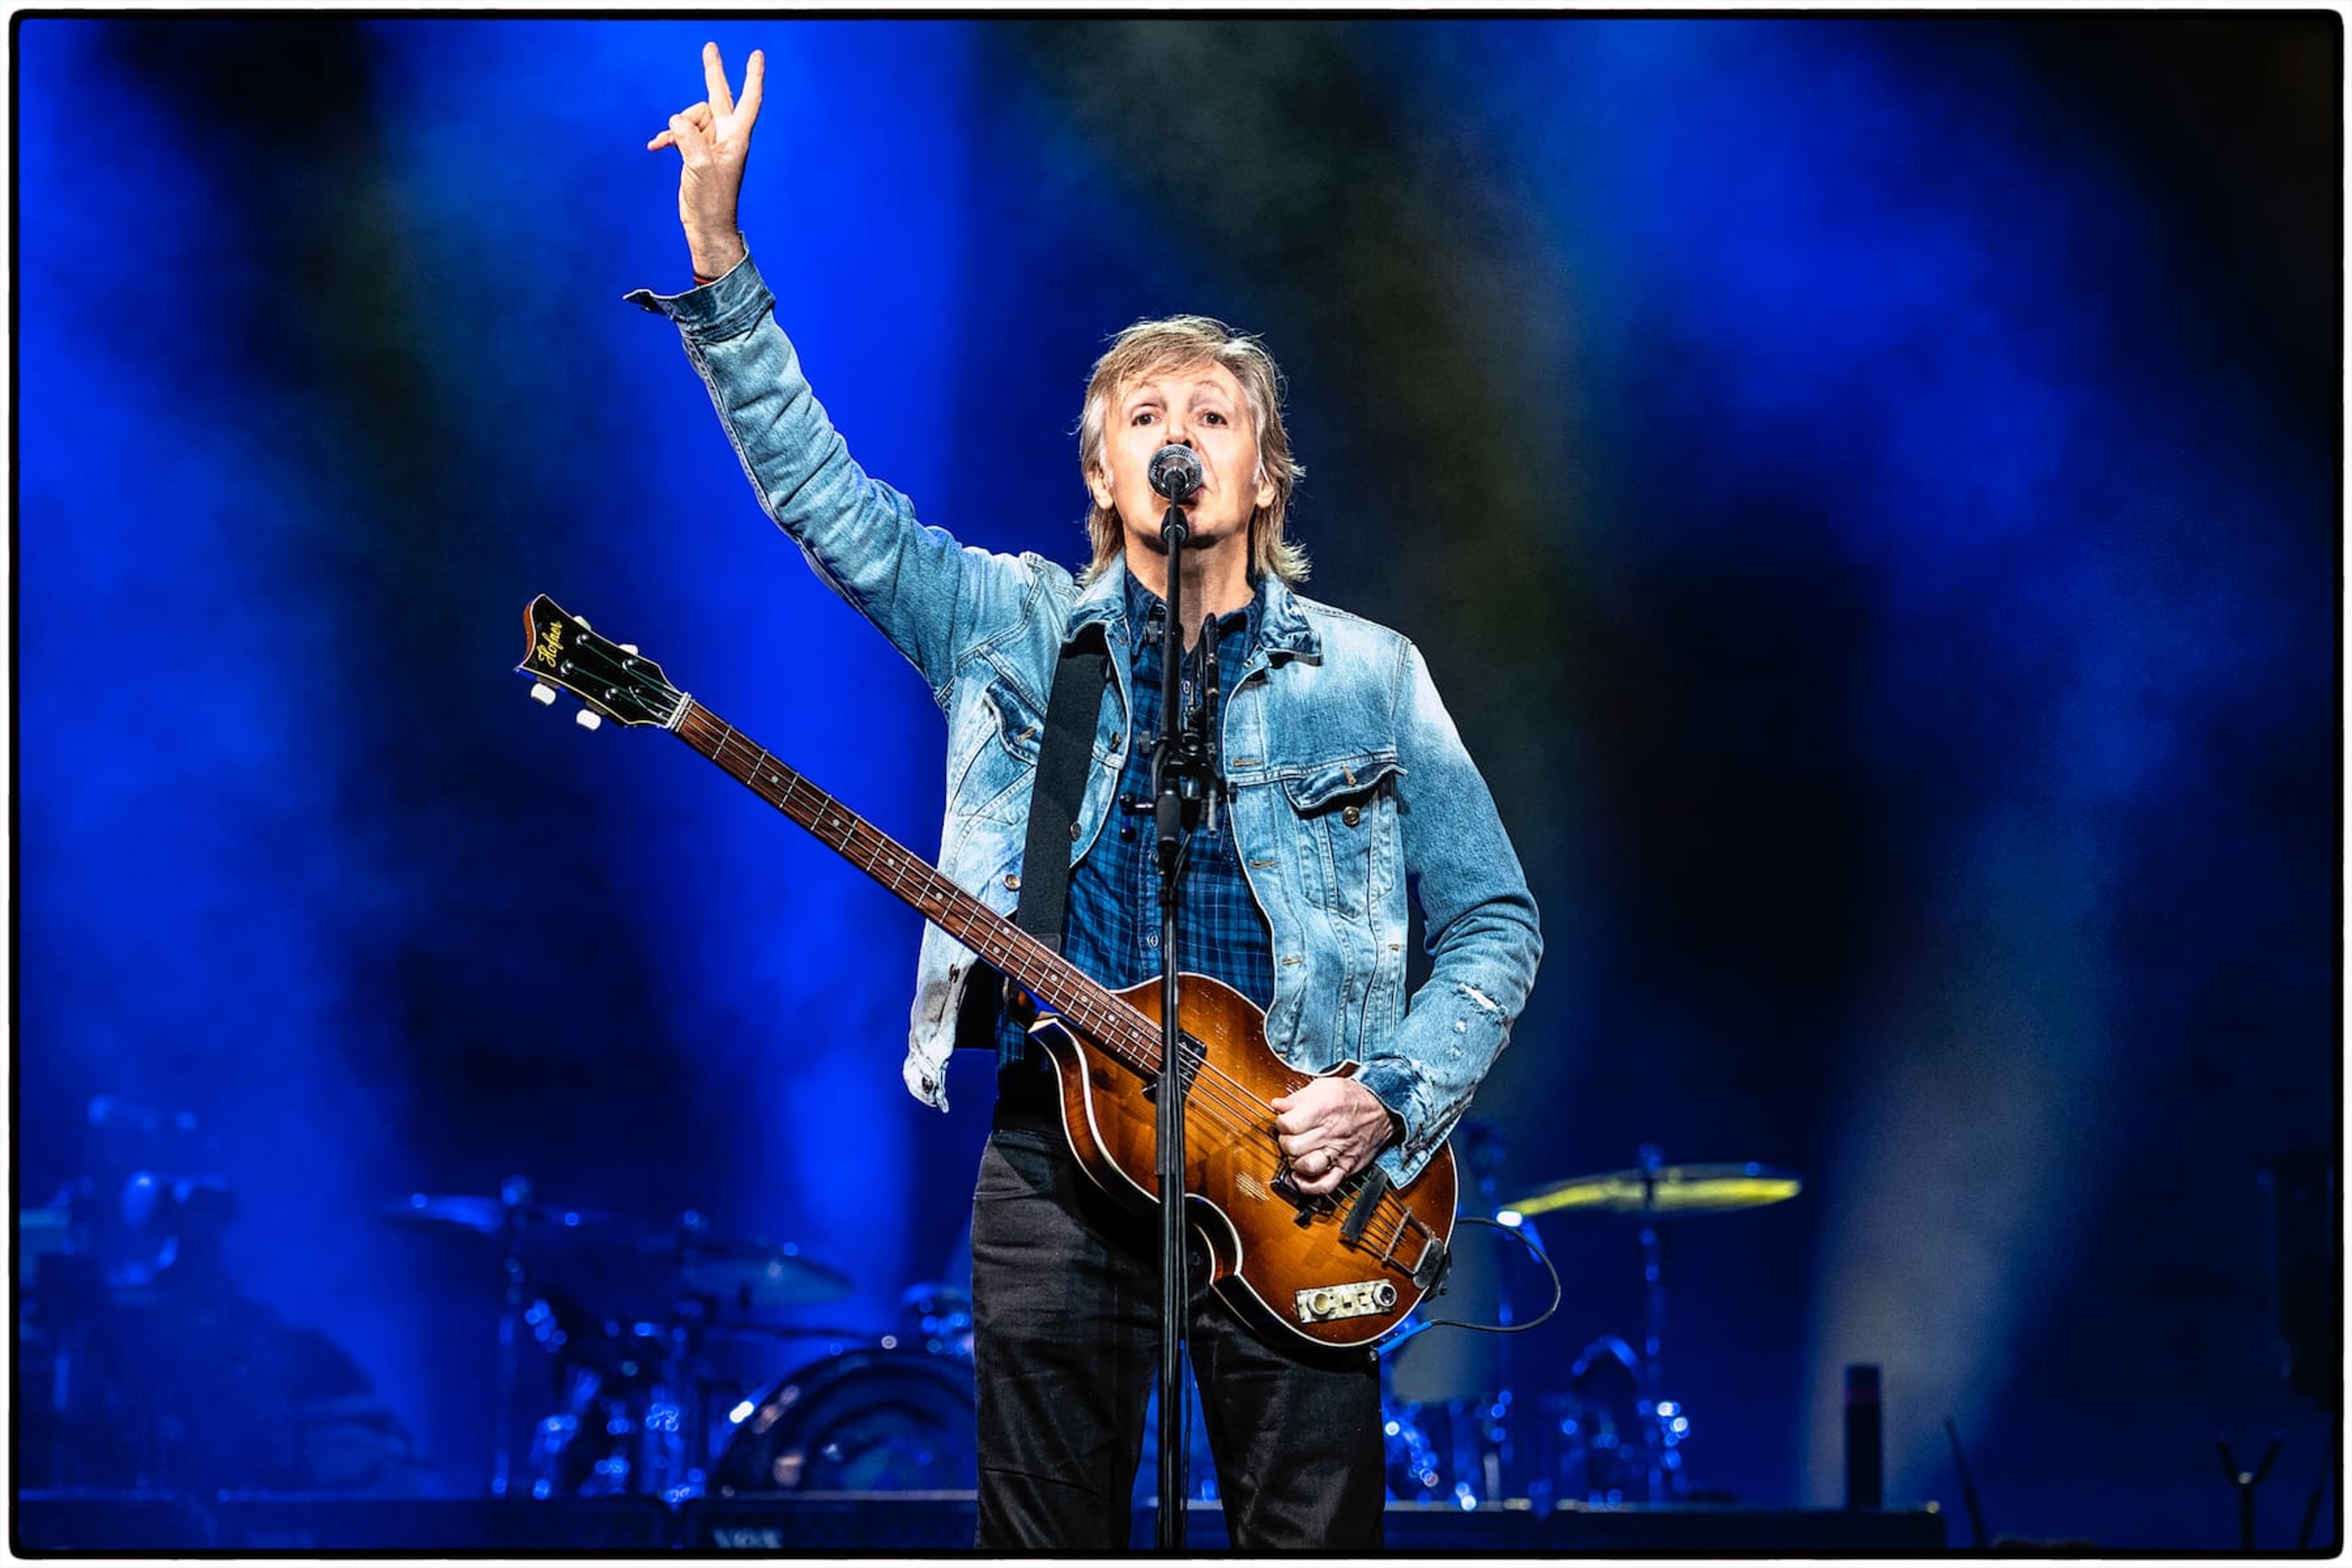 Photo of Paul performing in 2019 with his Hofner bass guitar and making a peace sign